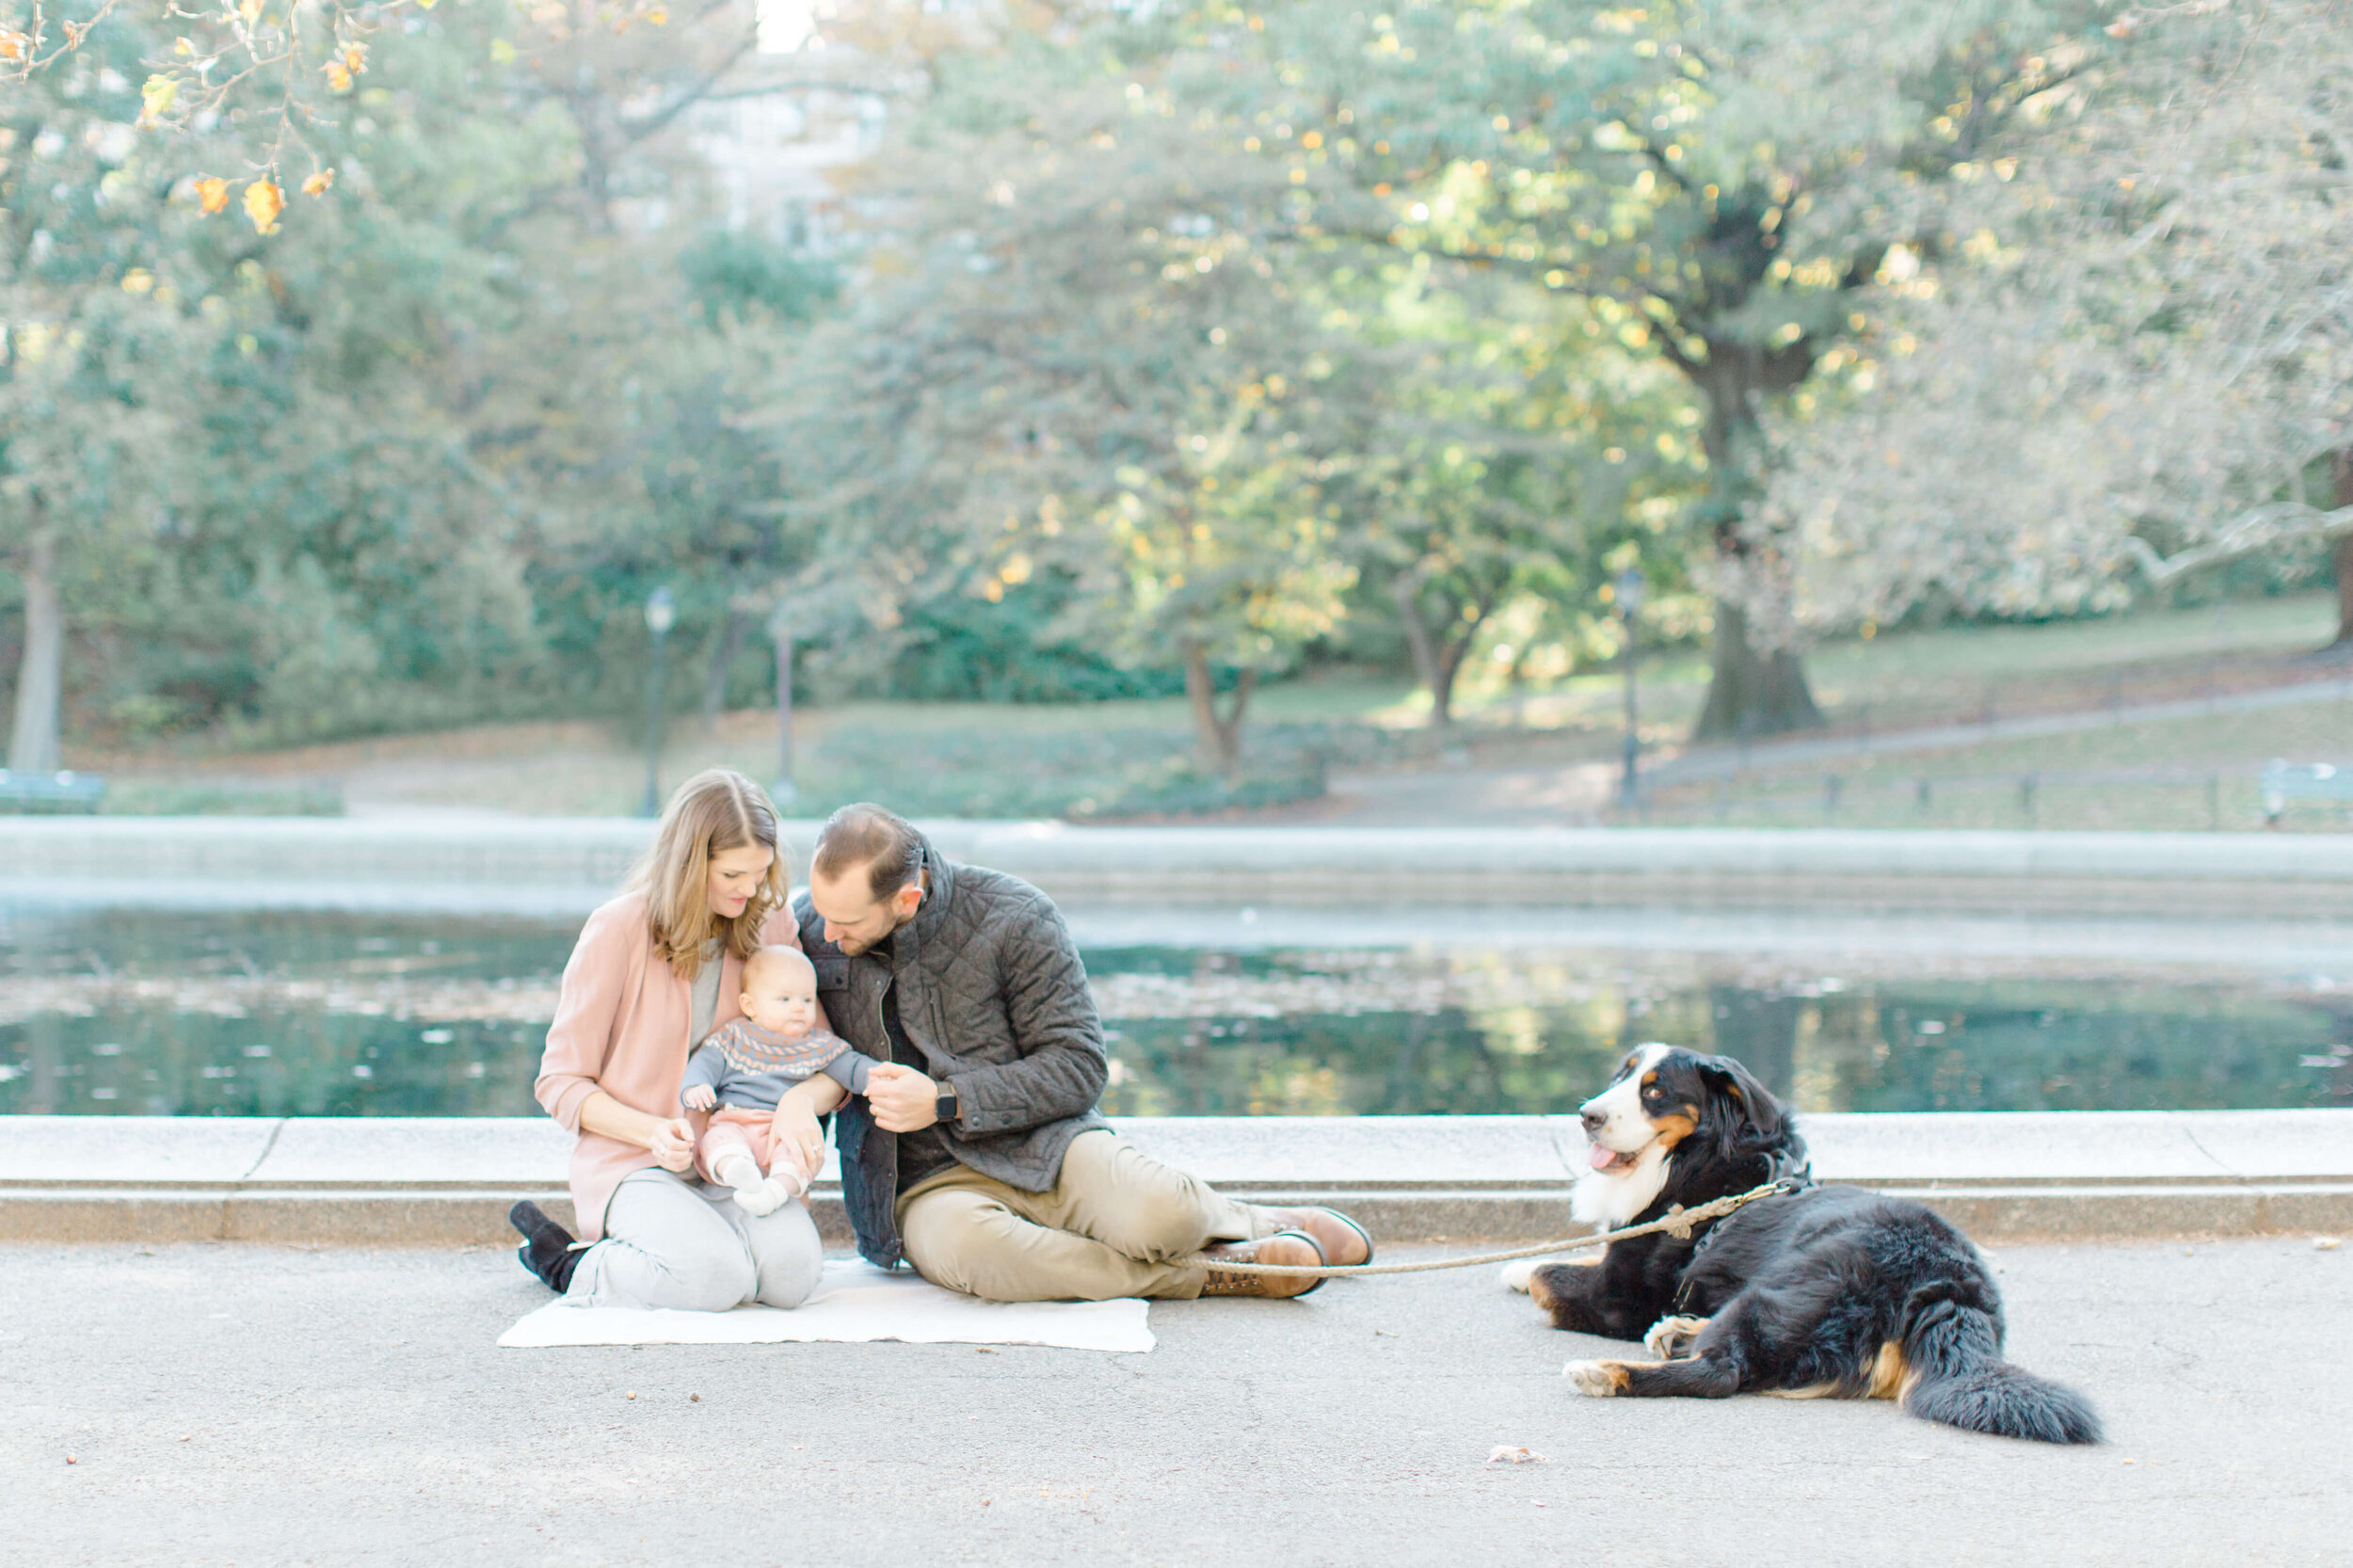 NYC Family Photographer, Jacqueline Clair, features a beautiful family session in Central Park